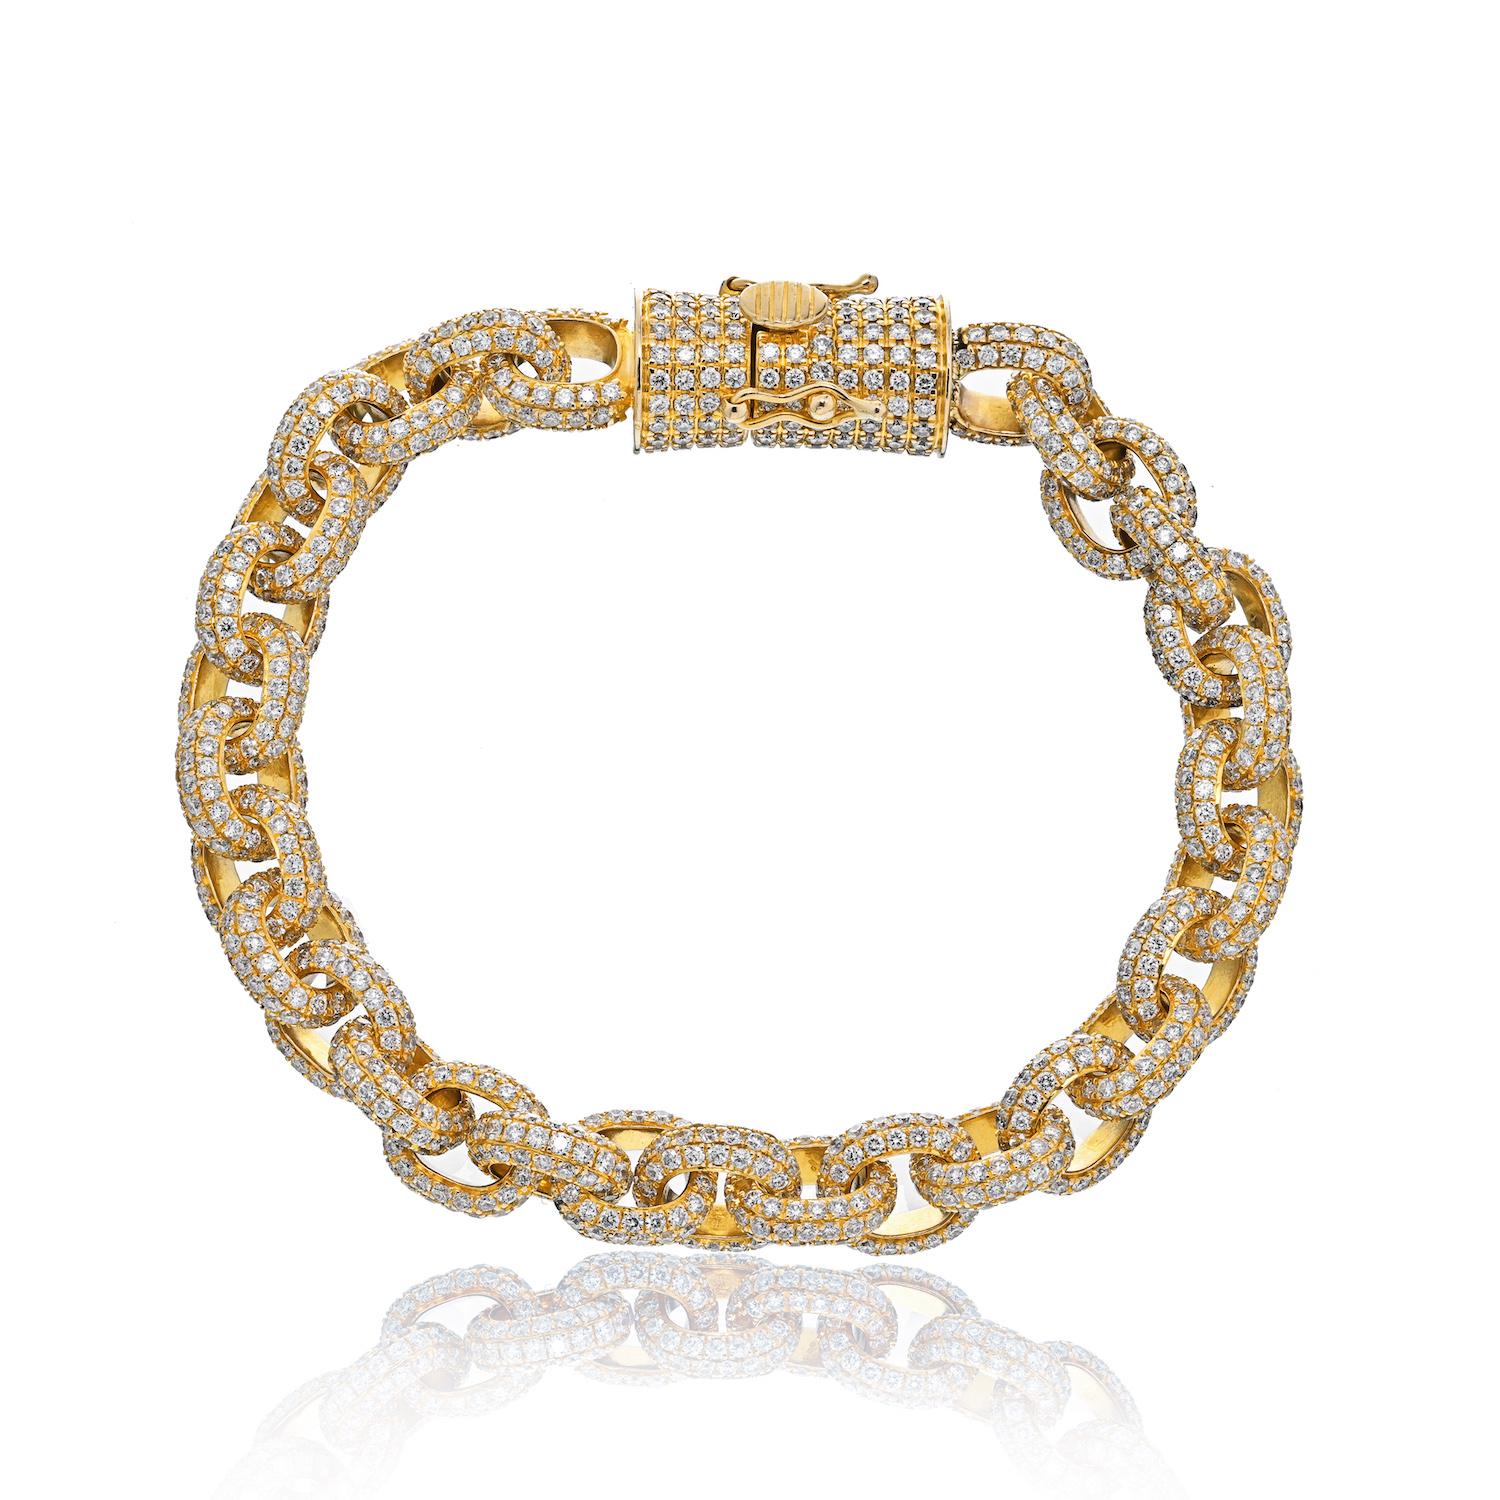 This is a stunning diamond link bracelet crafted in 14k yellow gold mounted with round-cut diamonds over solid gold links. Each diamond is a micro-round cut diamond but rest assured the sparkle is amazing! Even the lobster lock is set with diamonds